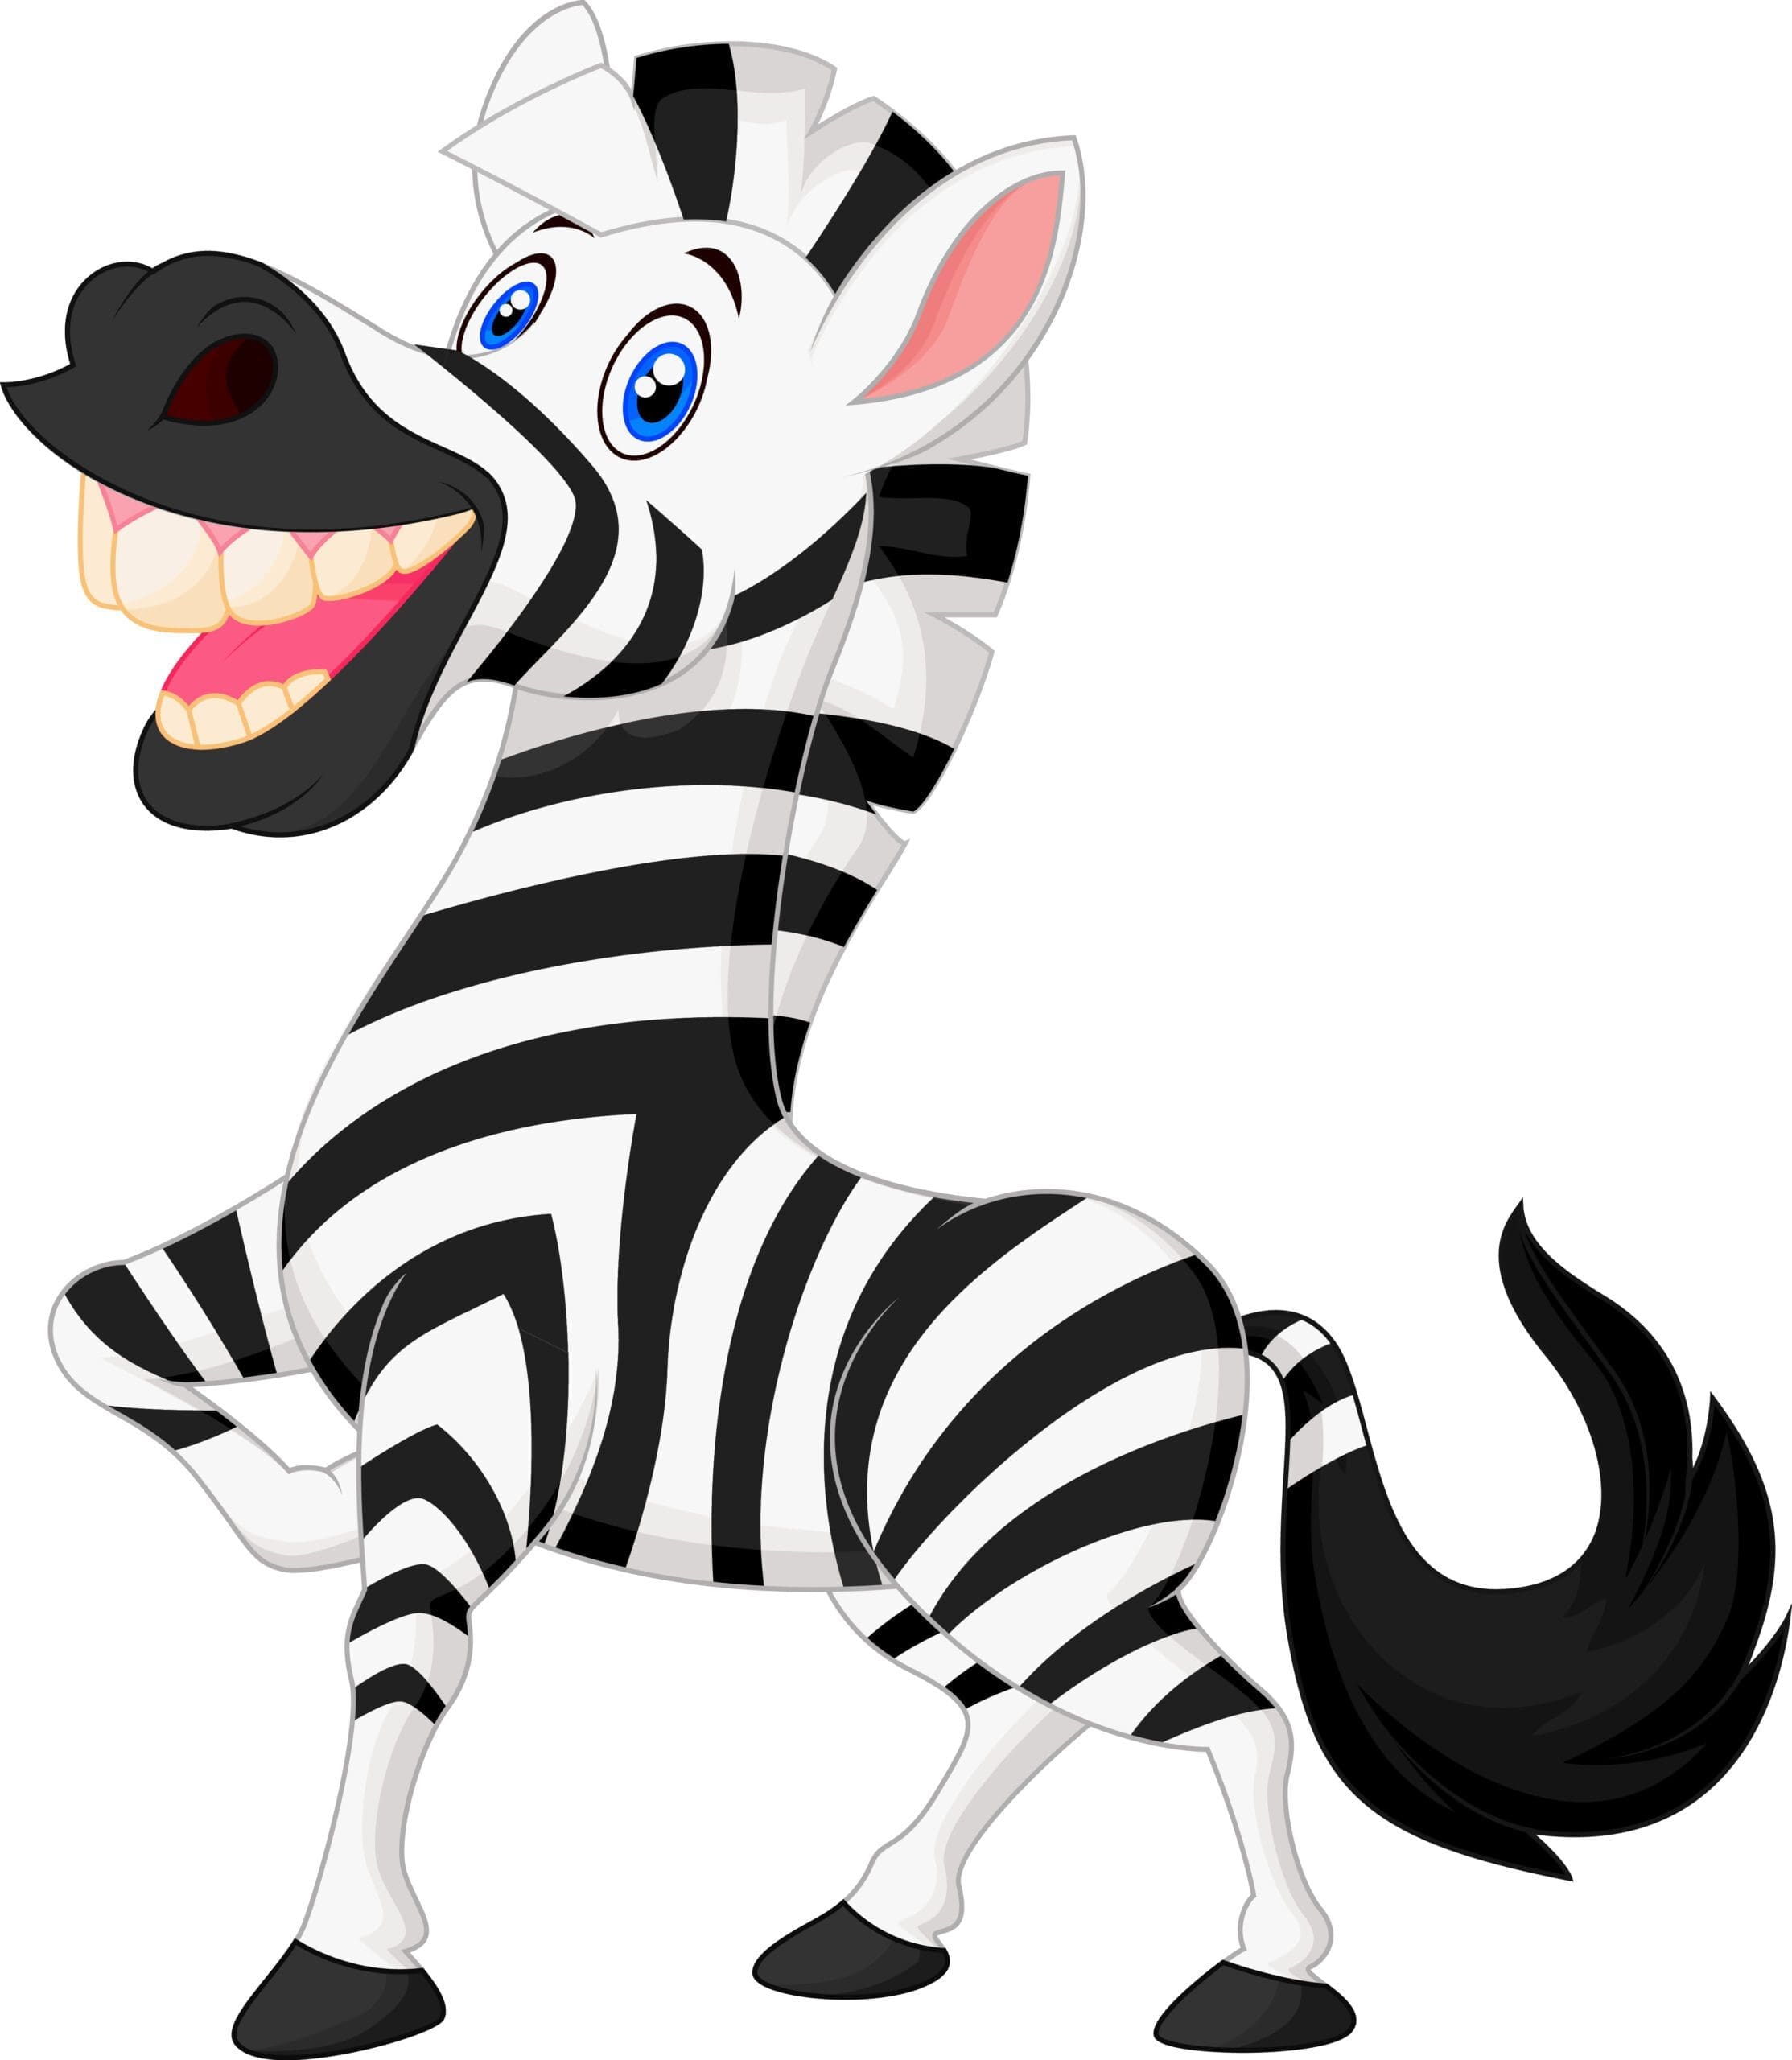 Cartoon graphic of a group of zebra stripes mingling in a grassy field